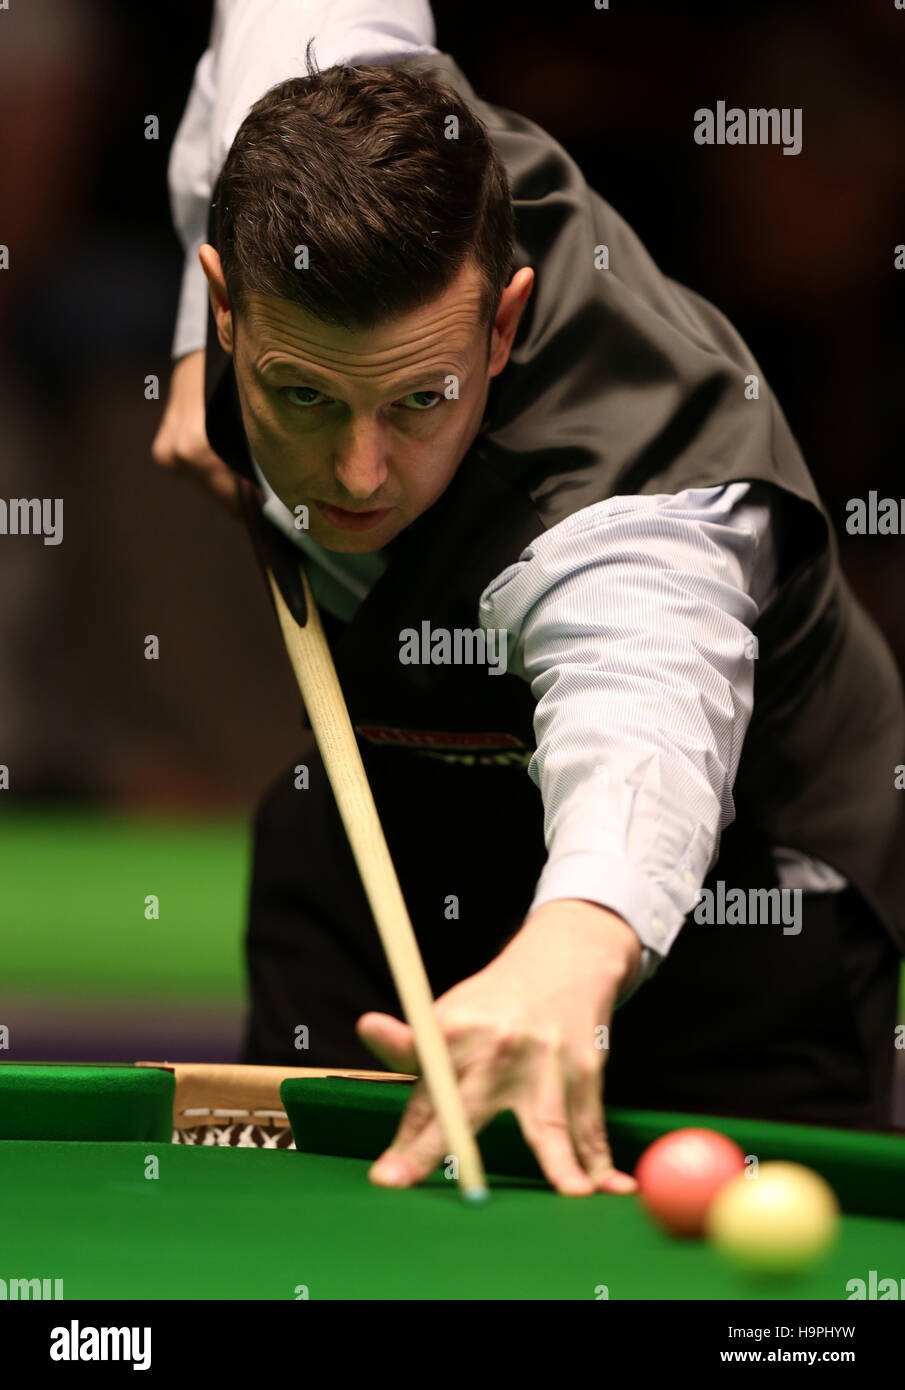 Peter Lines in action during his first round match against Neil Robertson during day three of the Betway UK Championships 2016, at the York Barbican. PRESS ASSOCIATION Photo. Picture date: Thursday November 24, 2016. See PA story SNOOKER York. Photo credit should read: Simon Cooper/PA Wire Stock Photo